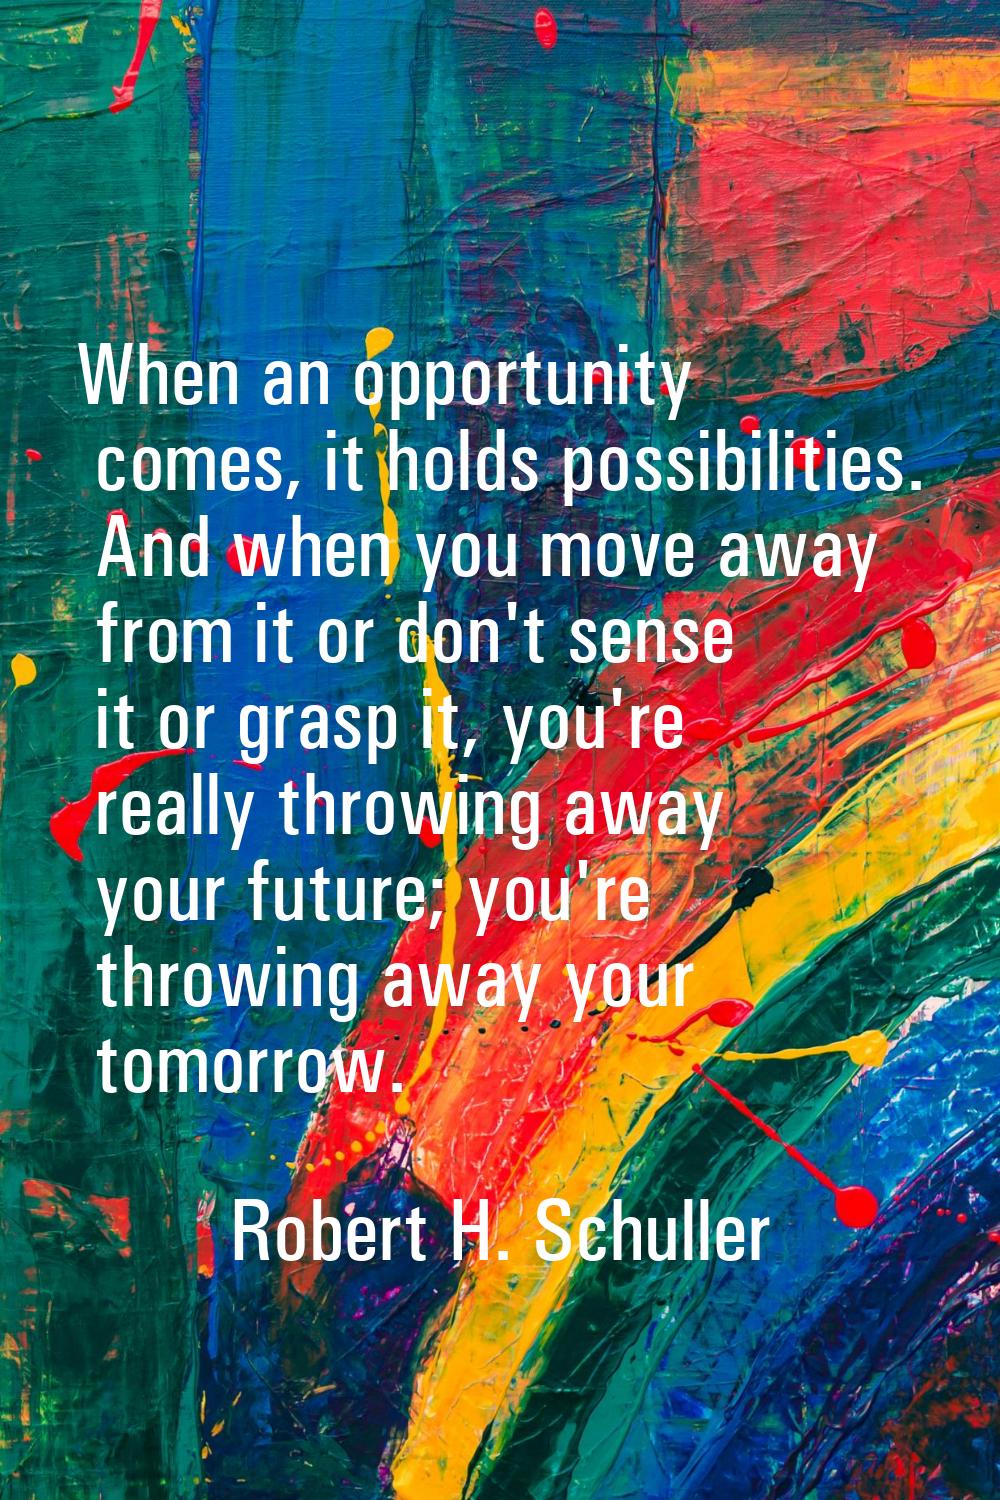 When an opportunity comes, it holds possibilities. And when you move away from it or don't sense it